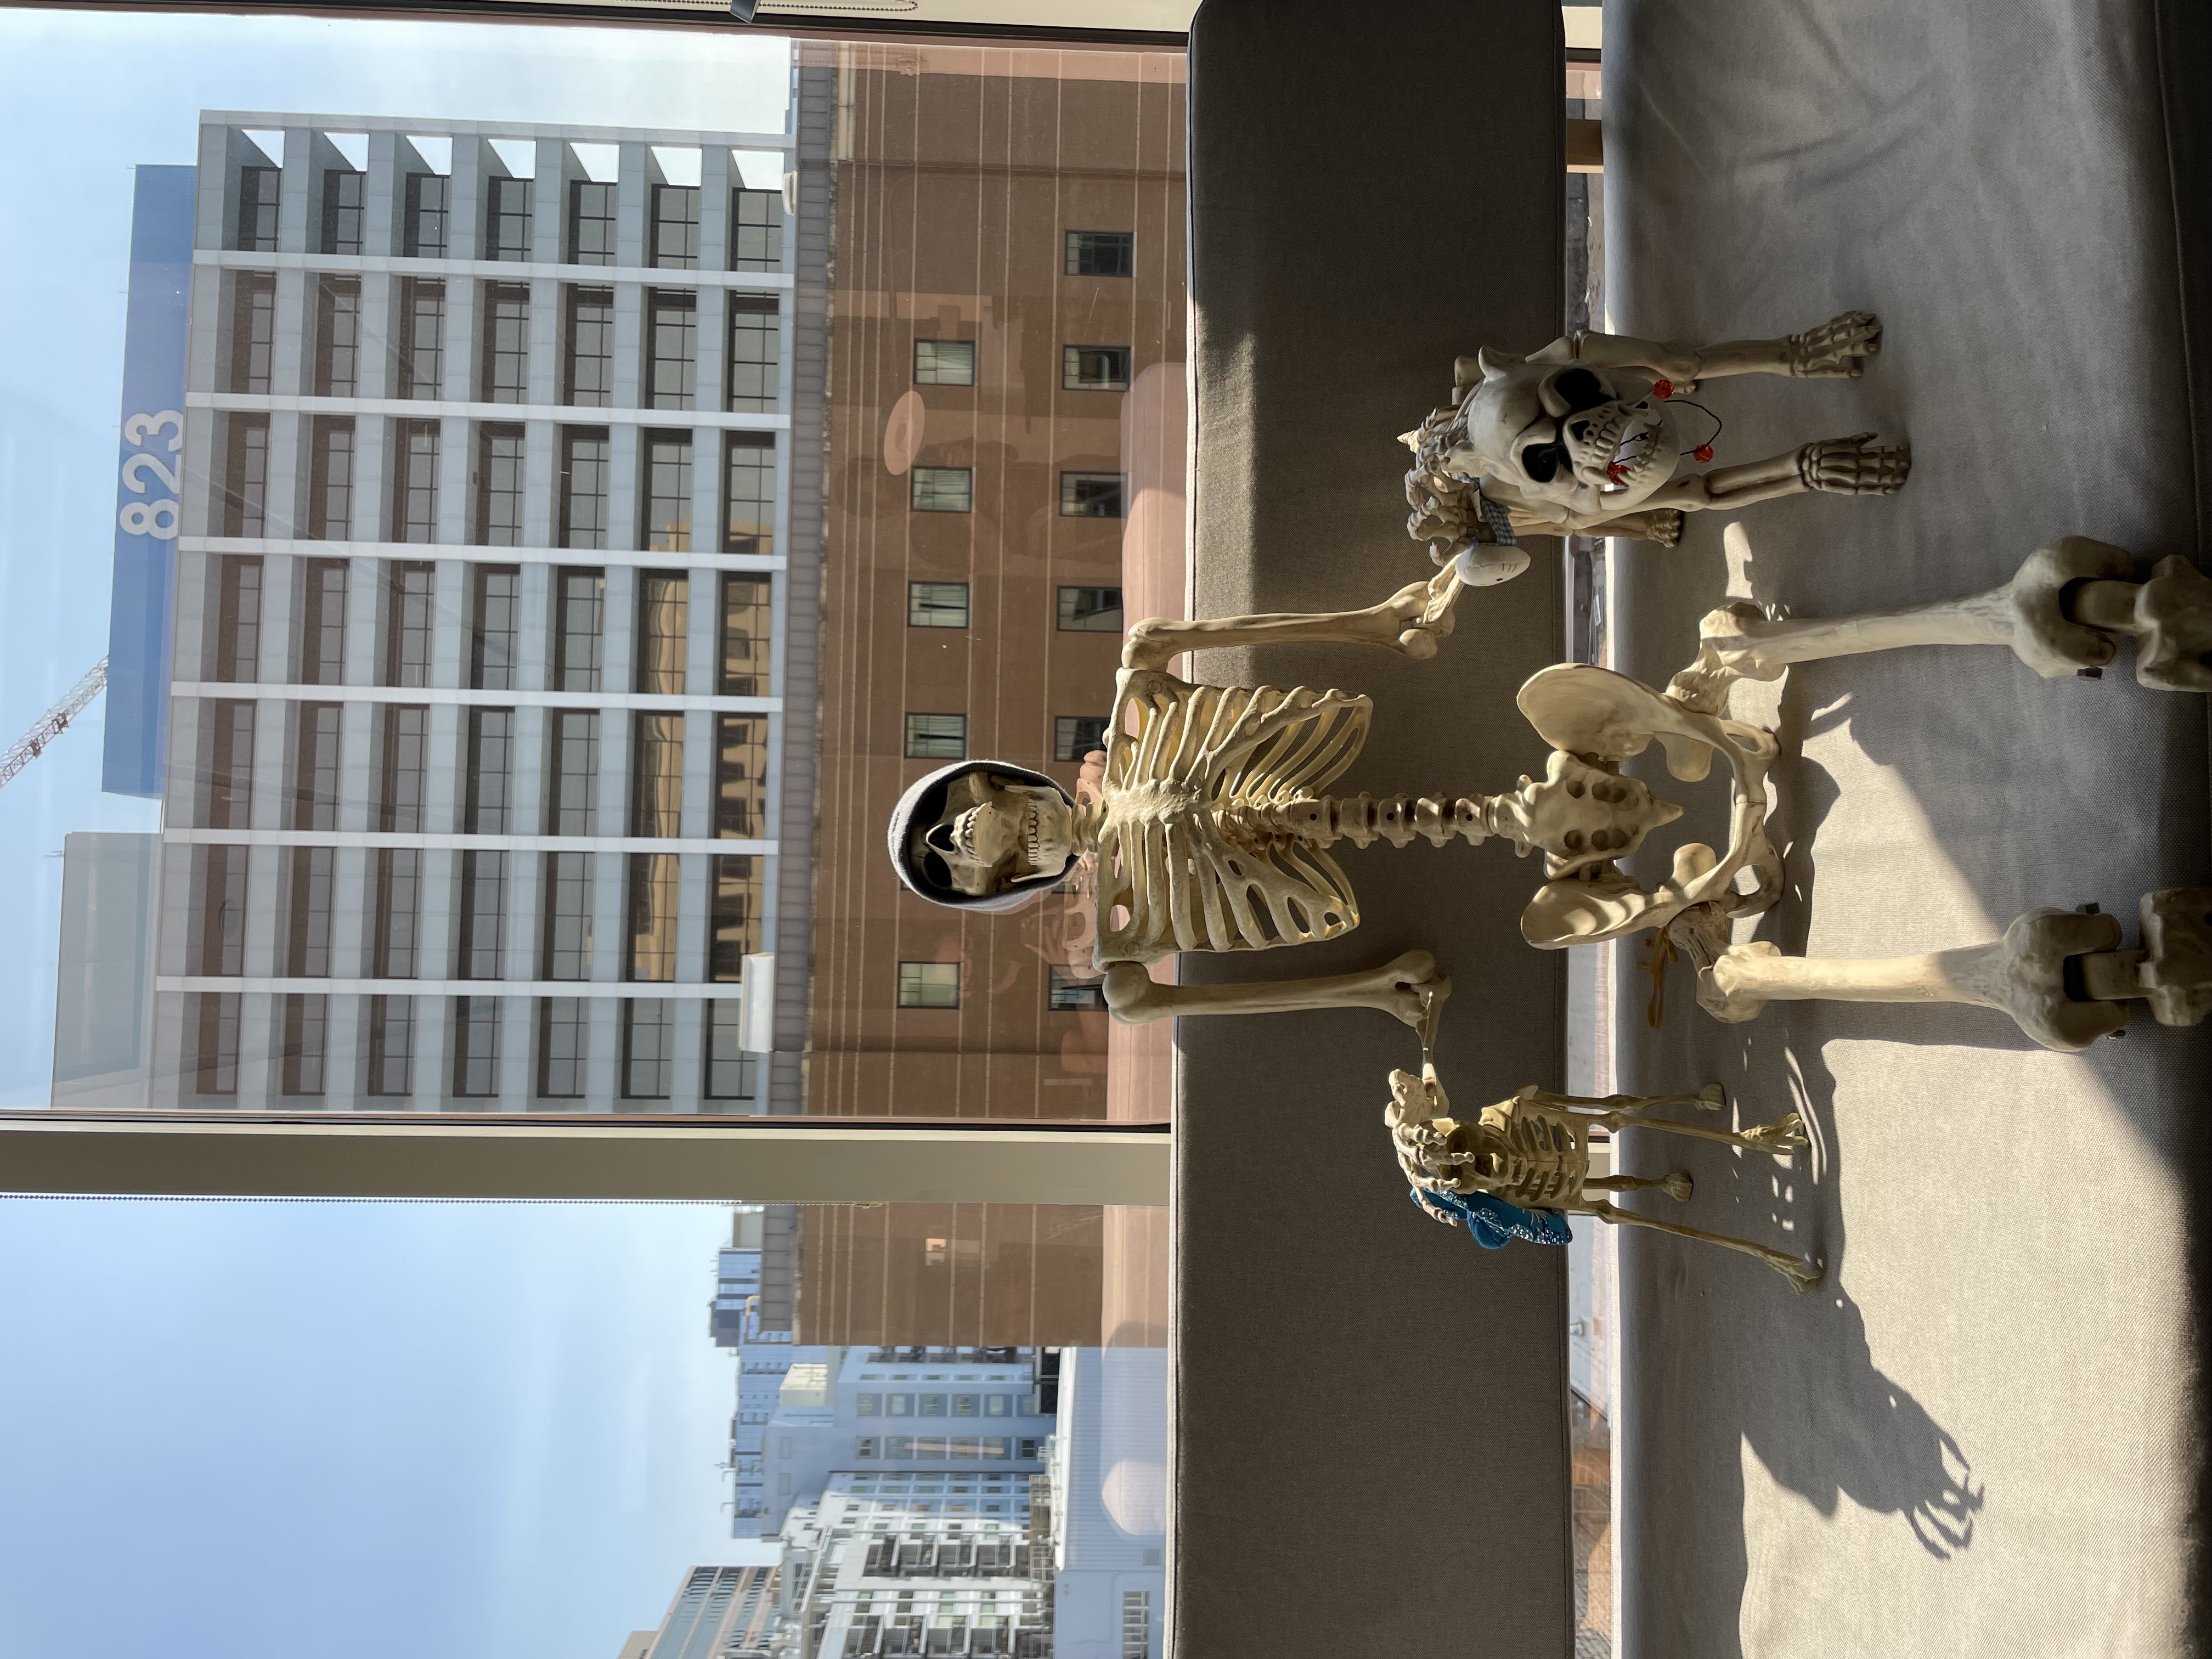 Picture of a plastic skeleton sitting in the Texas Tribune office.